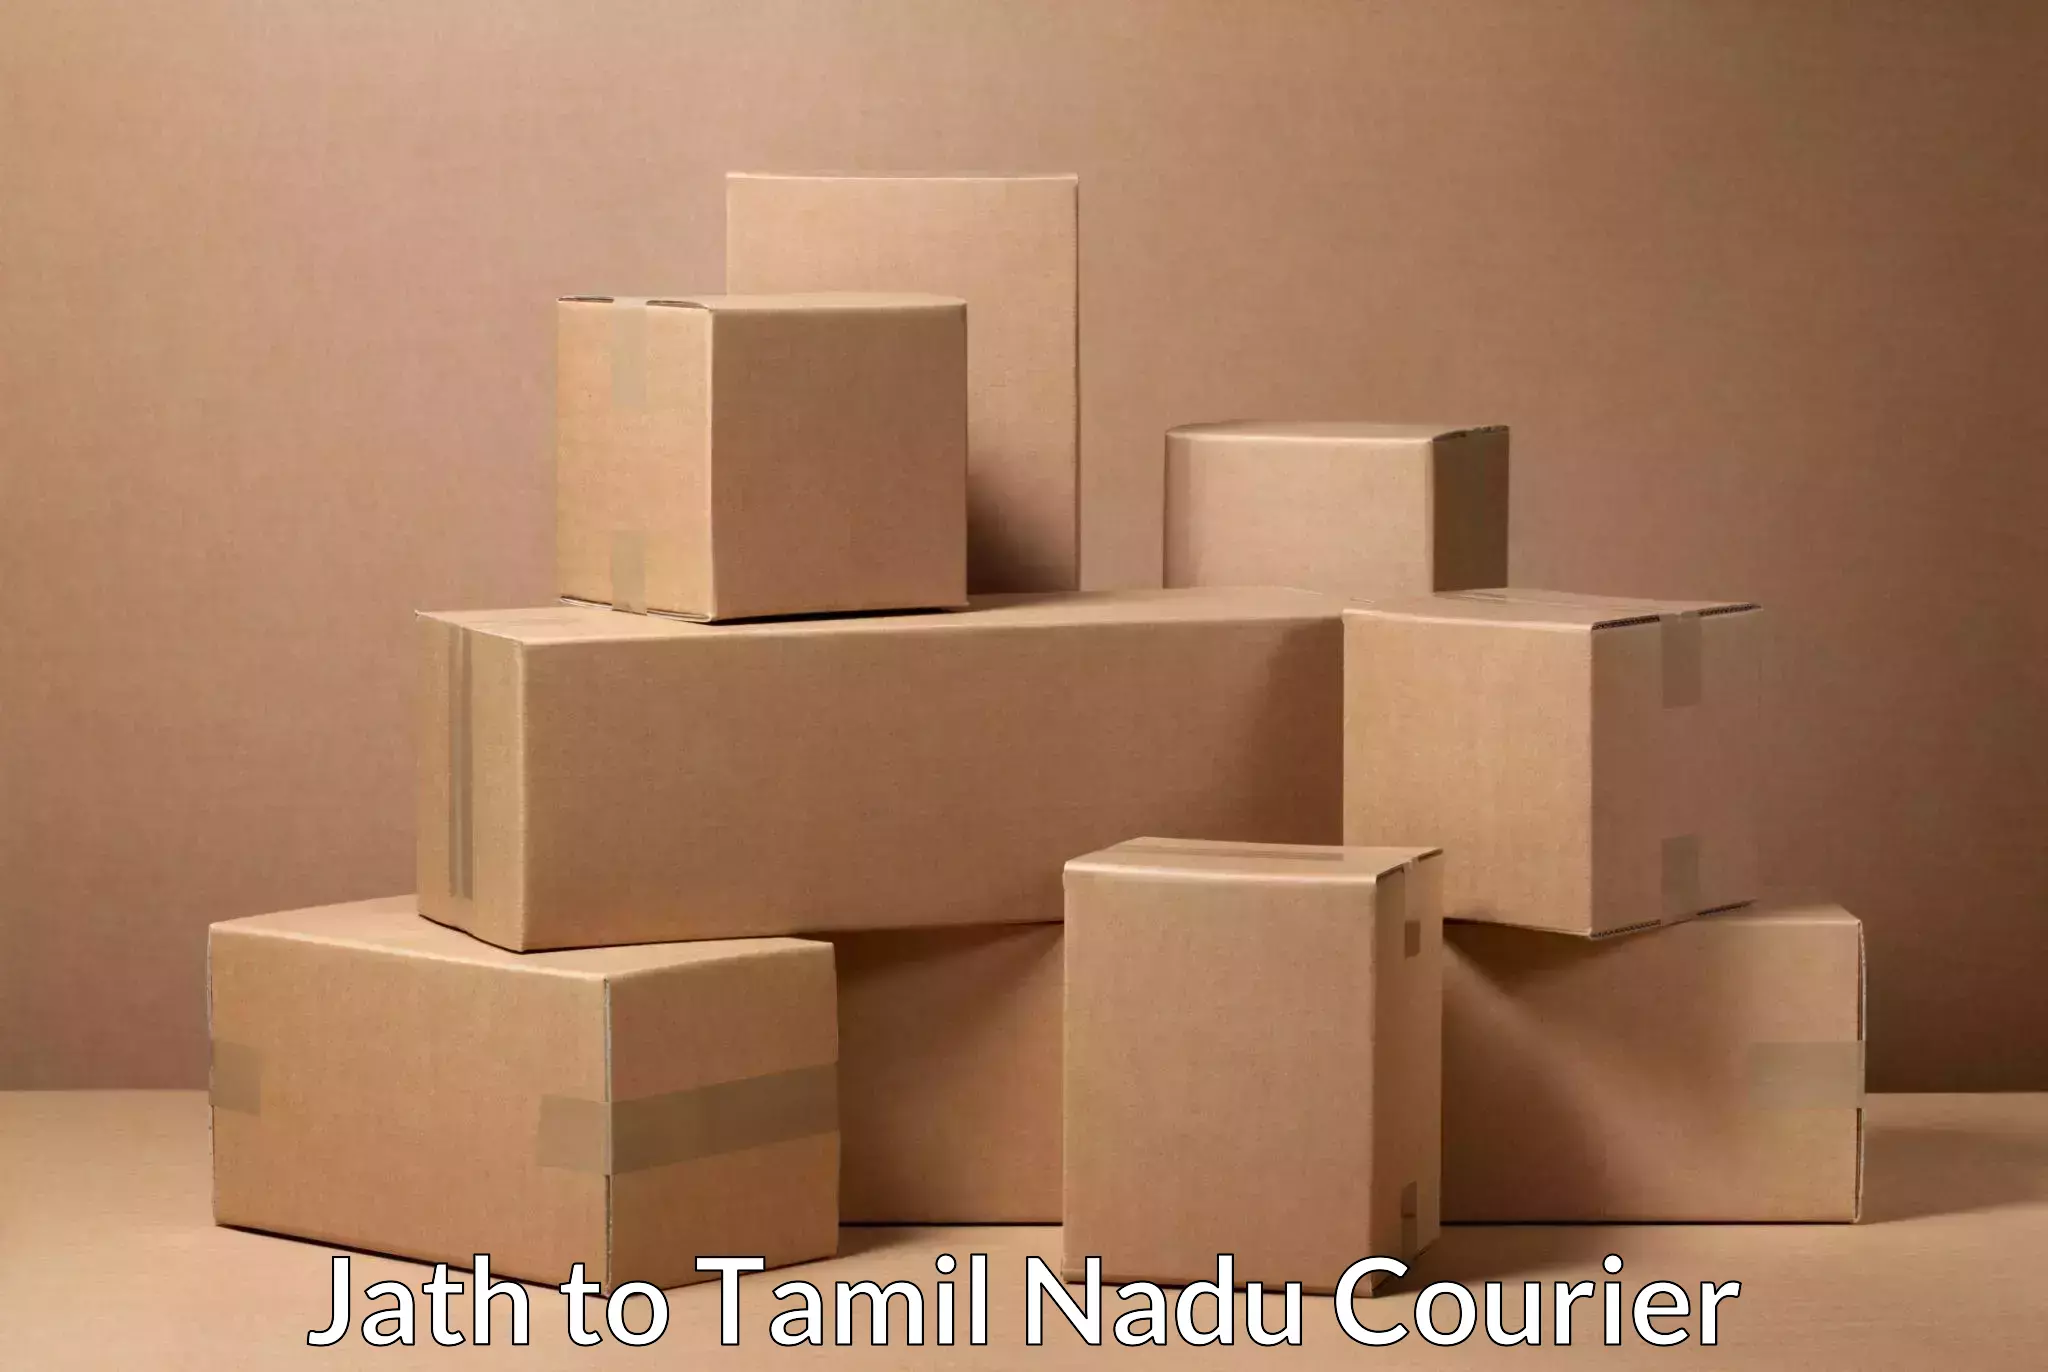 Large package courier Jath to Sivaganga